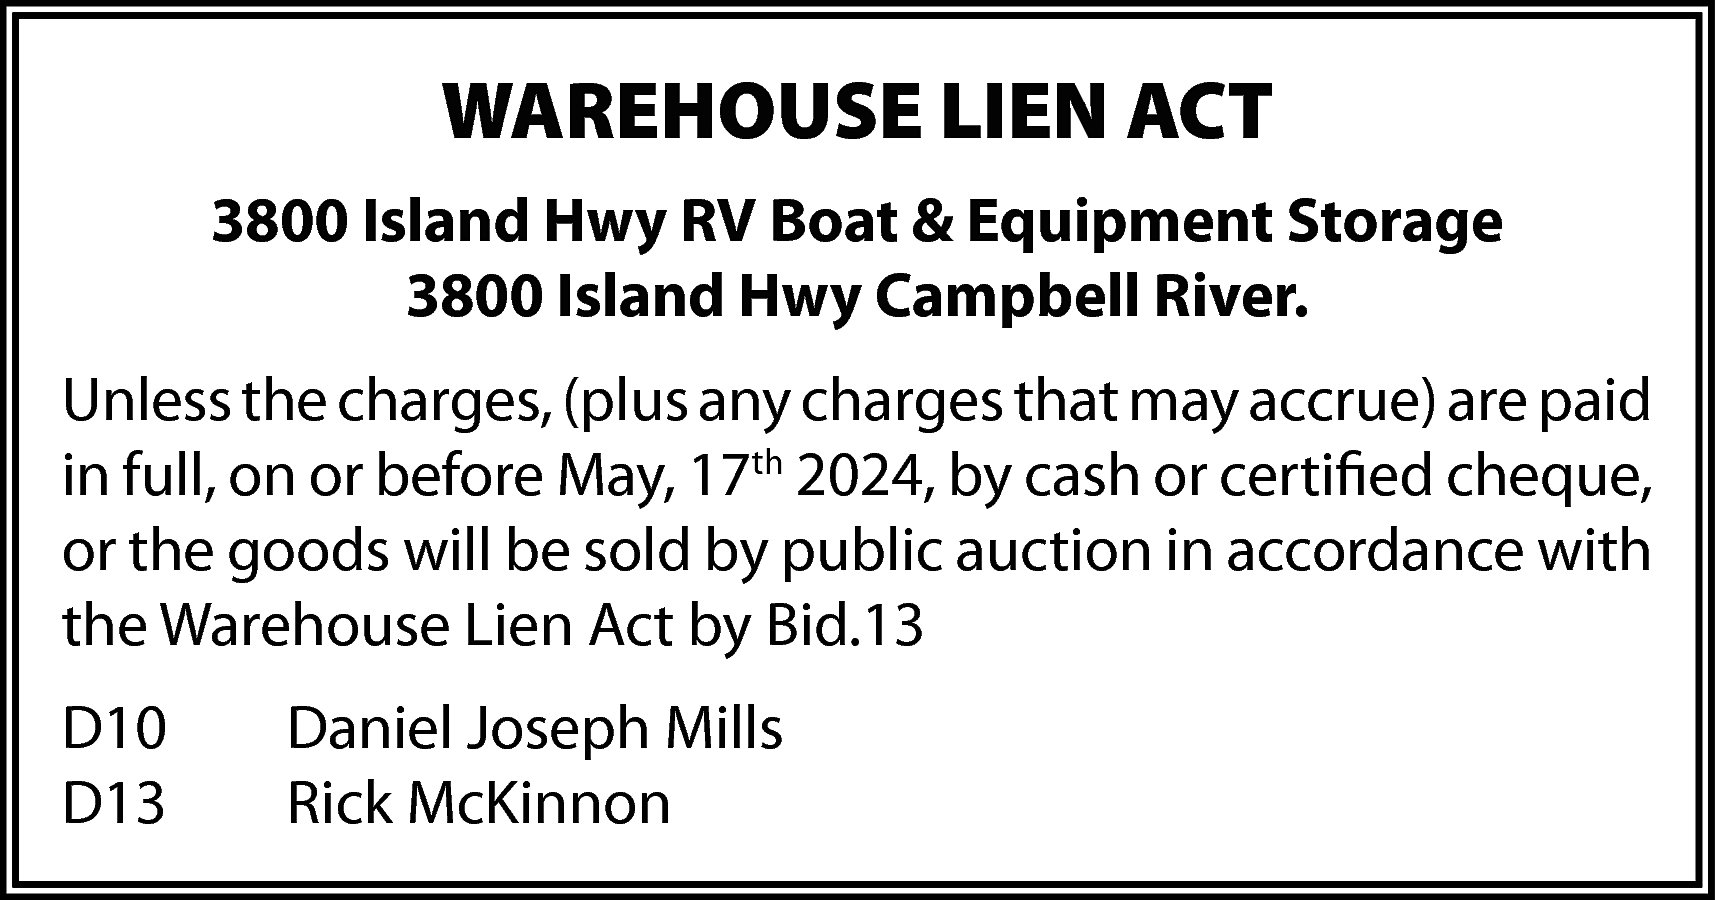 WAREHOUSE LIEN ACT <br>3800 Island  WAREHOUSE LIEN ACT  3800 Island Hwy RV Boat & Equipment Storage  3800 Island Hwy Campbell River.  Unless the charges, (plus any charges that may accrue) are paid  in full, on or before May, 17th 2024, by cash or certified cheque,  or the goods will be sold by public auction in accordance with  the Warehouse Lien Act by Bid.13  D10  D13    Daniel Joseph Mills  Rick McKinnon    